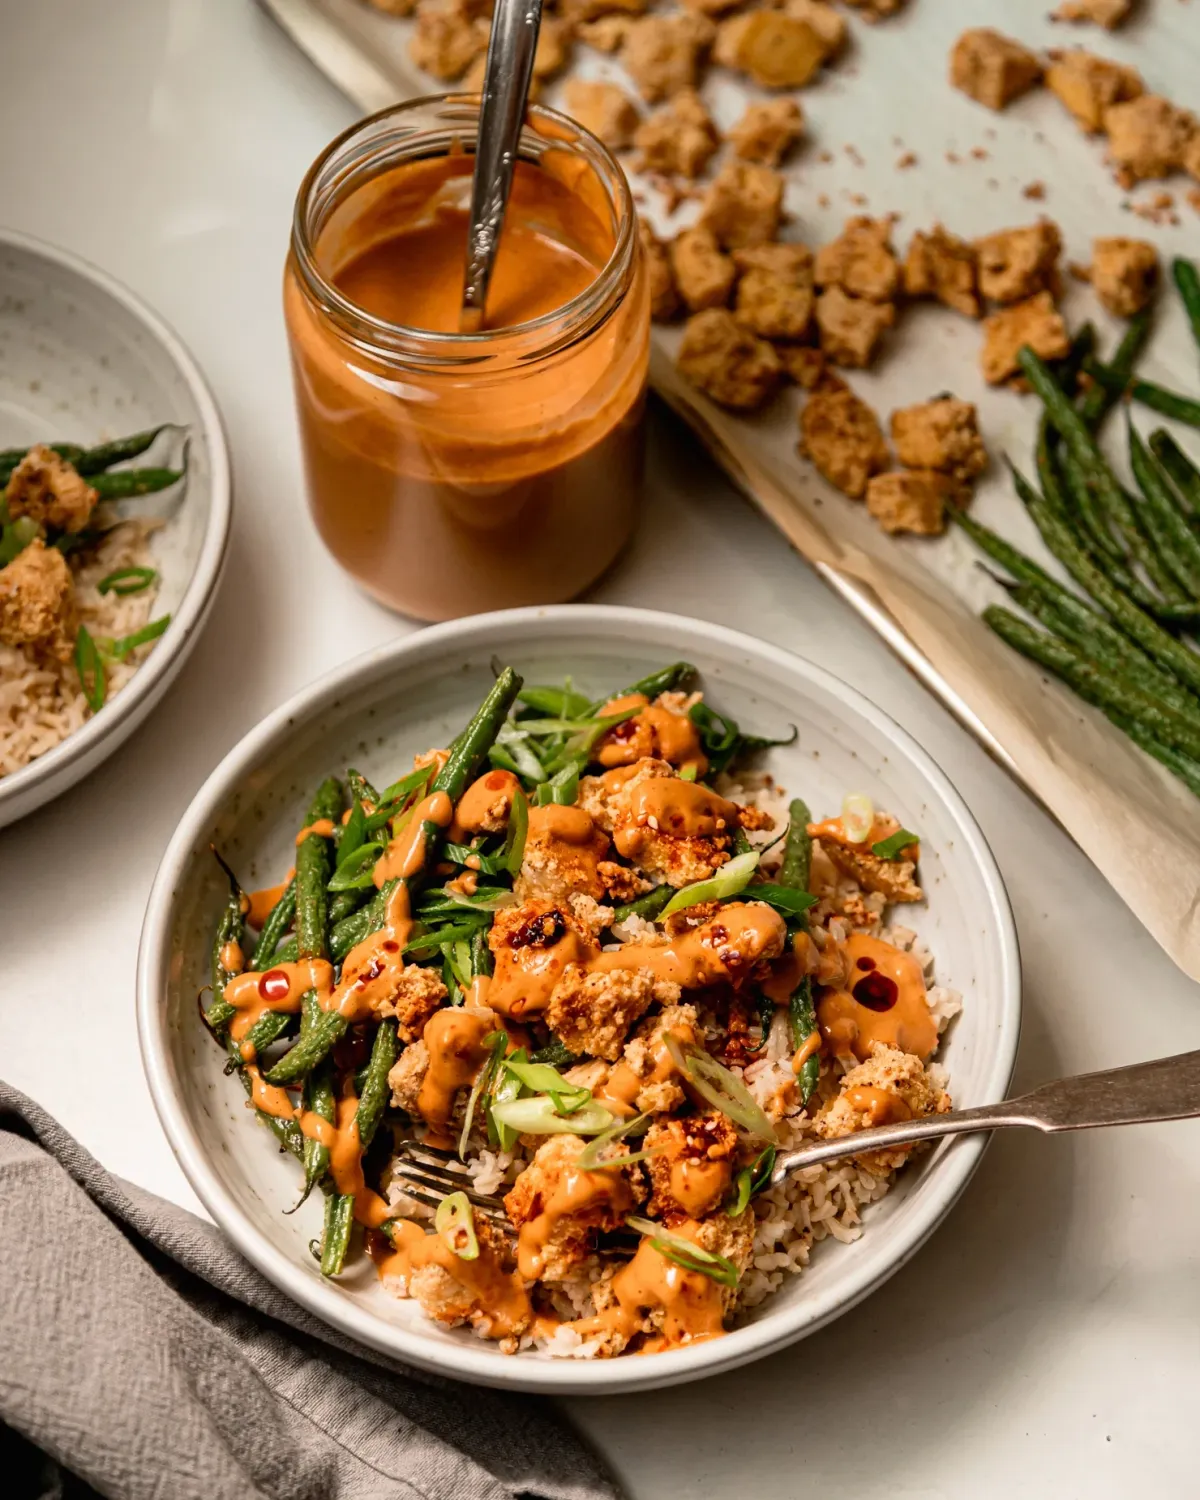 Spicy & Crispy Peanut Tofu with Green Beans